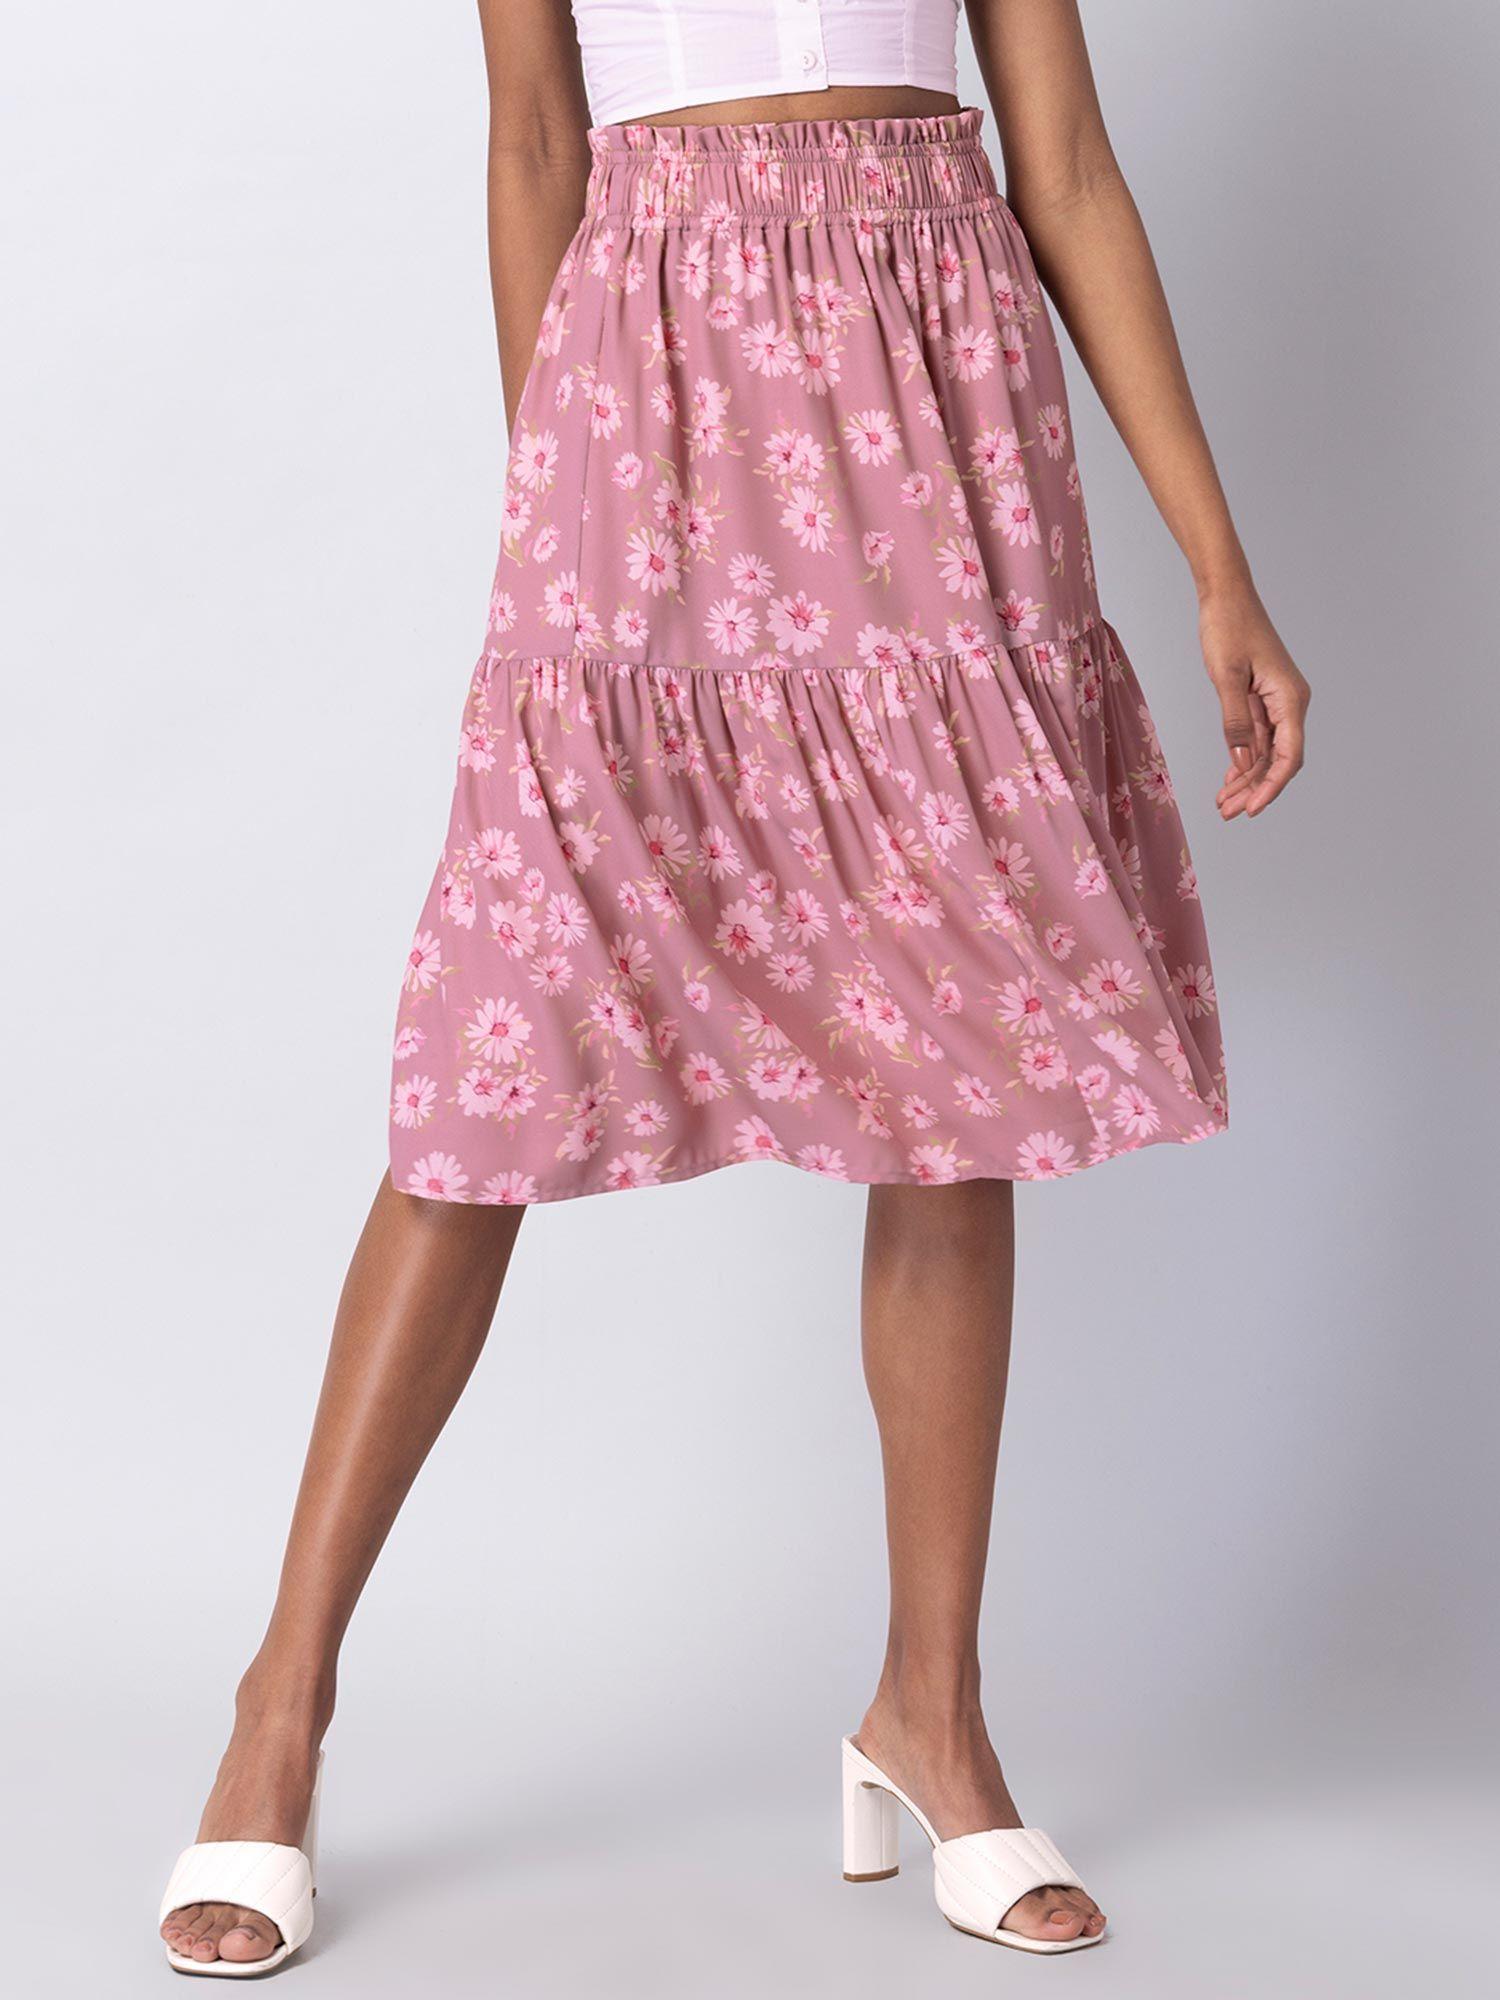 dusty pink floral knee length skirt